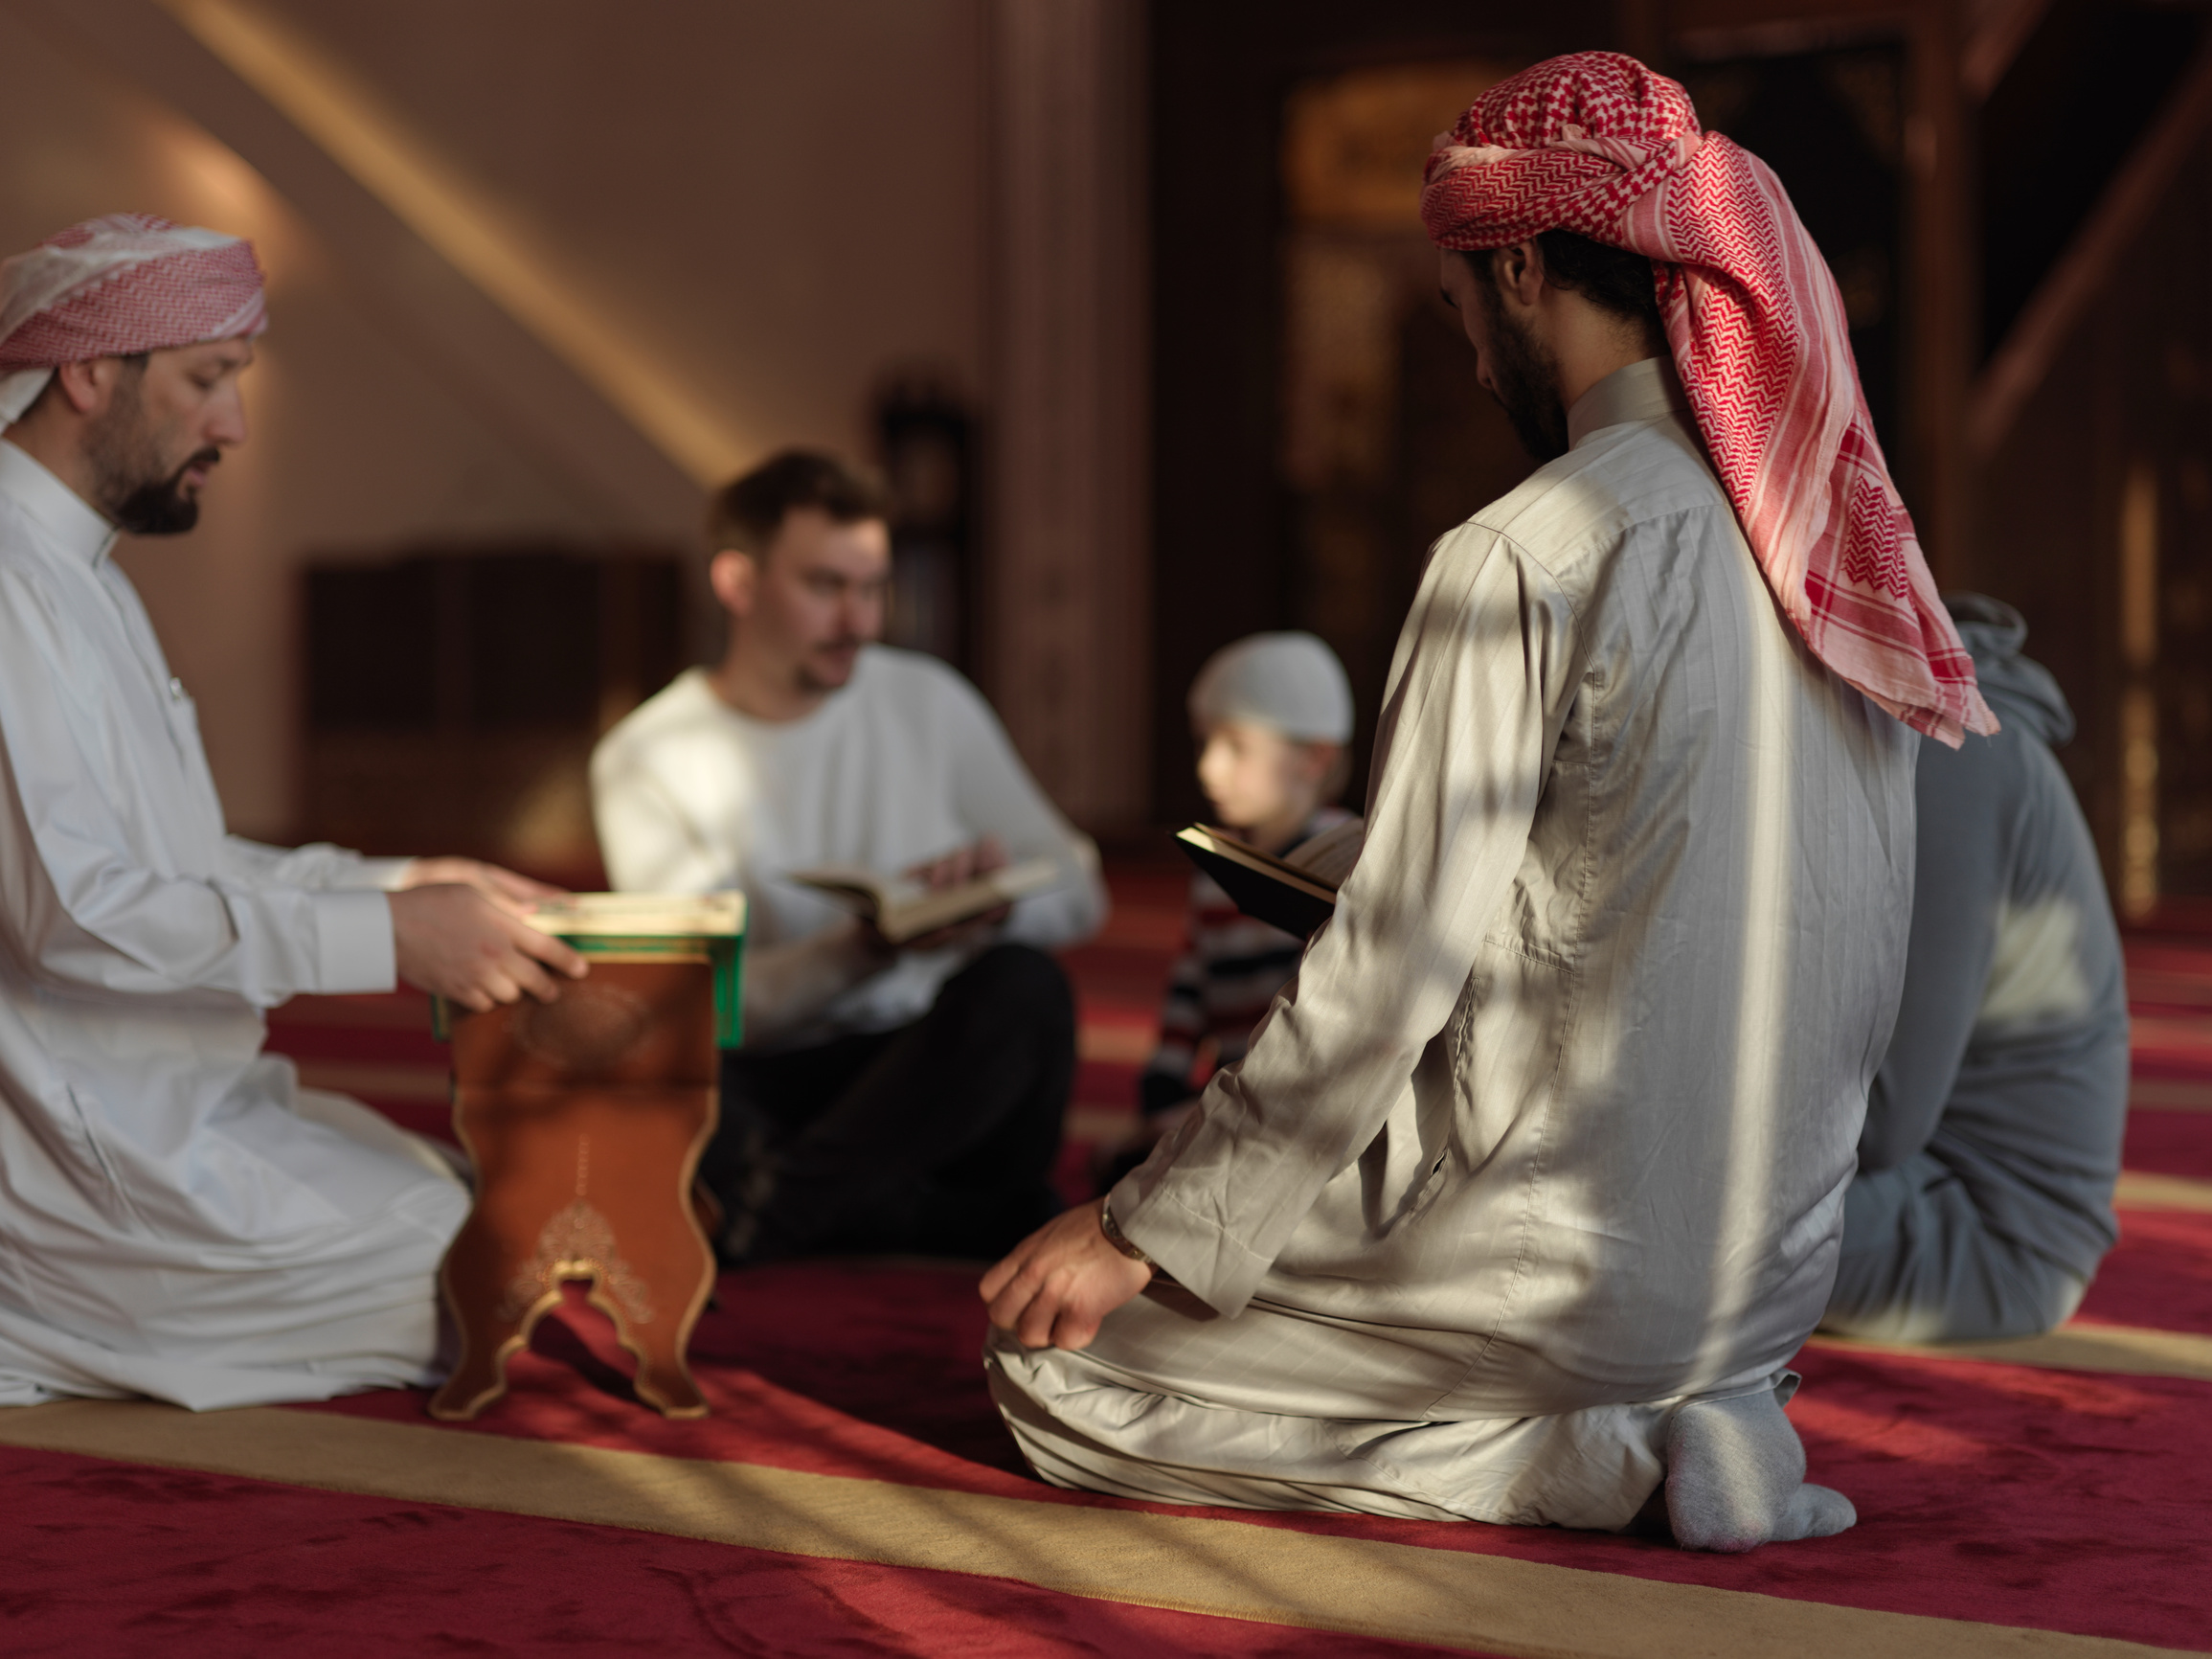 Muslim People in Mosque Reading Quran Together